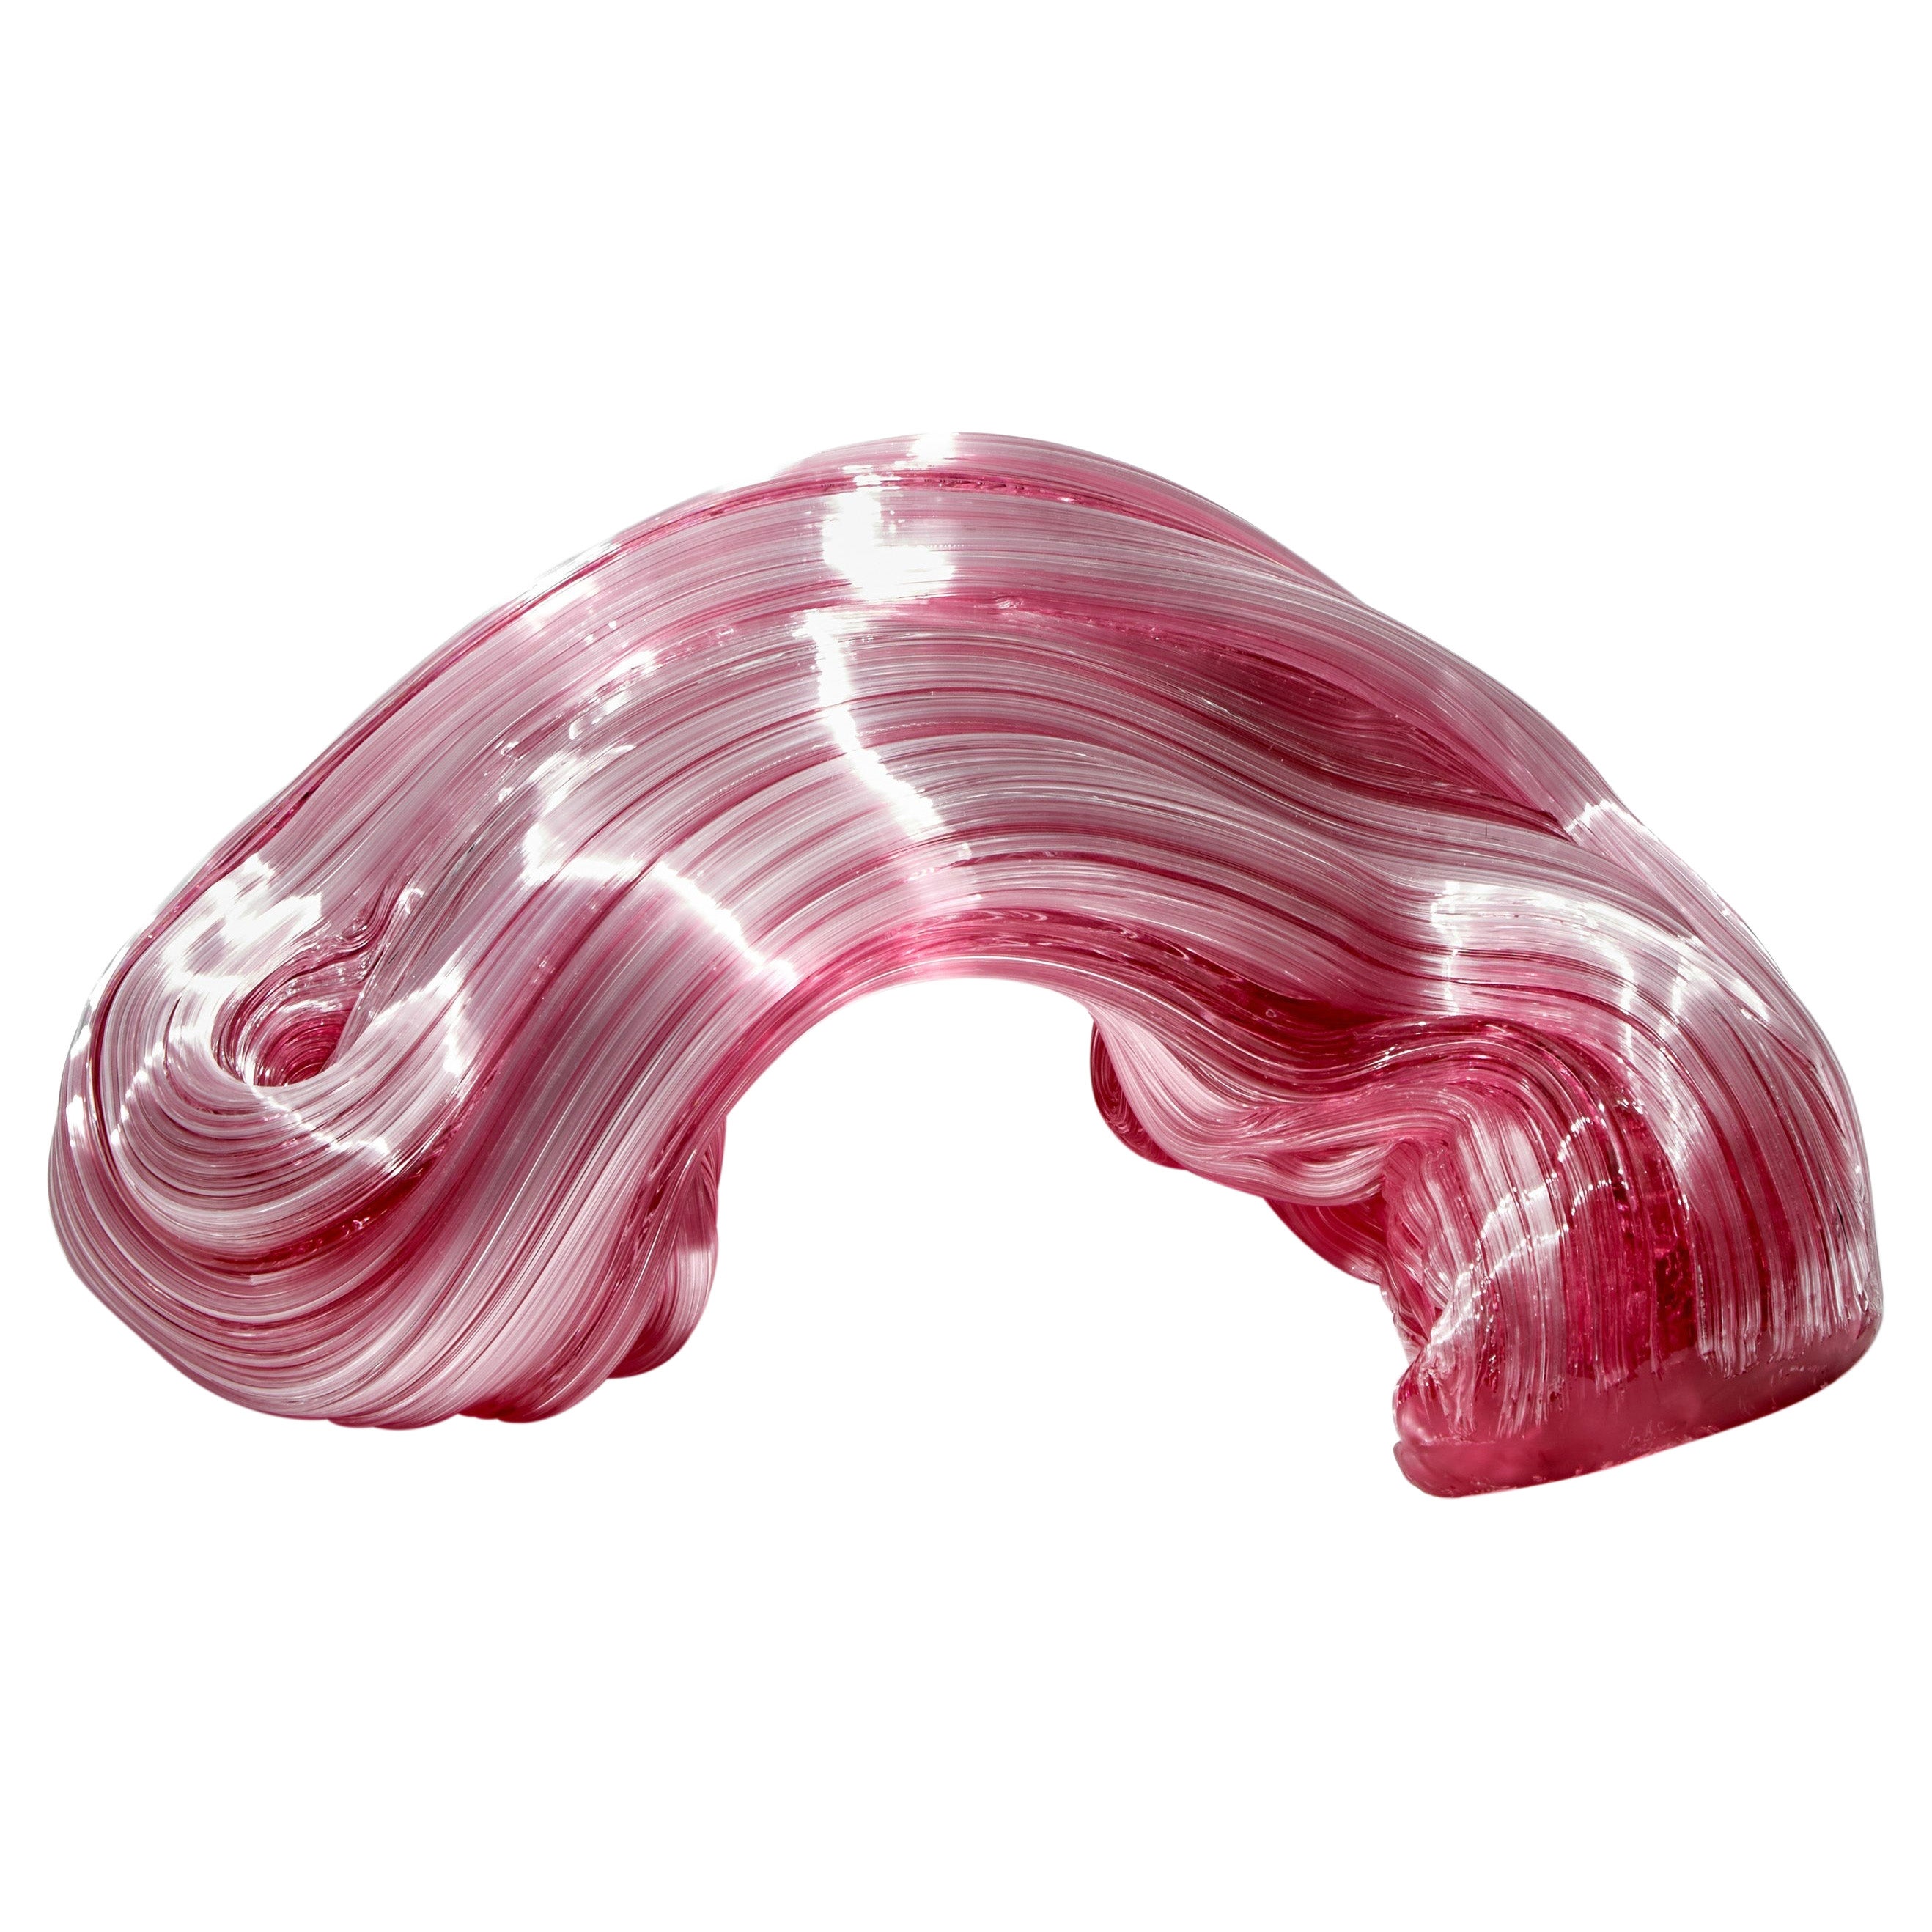 Soft Lines in Pink, a Unique Abstract Glass Sculpture by Maria Bang Espersen For Sale